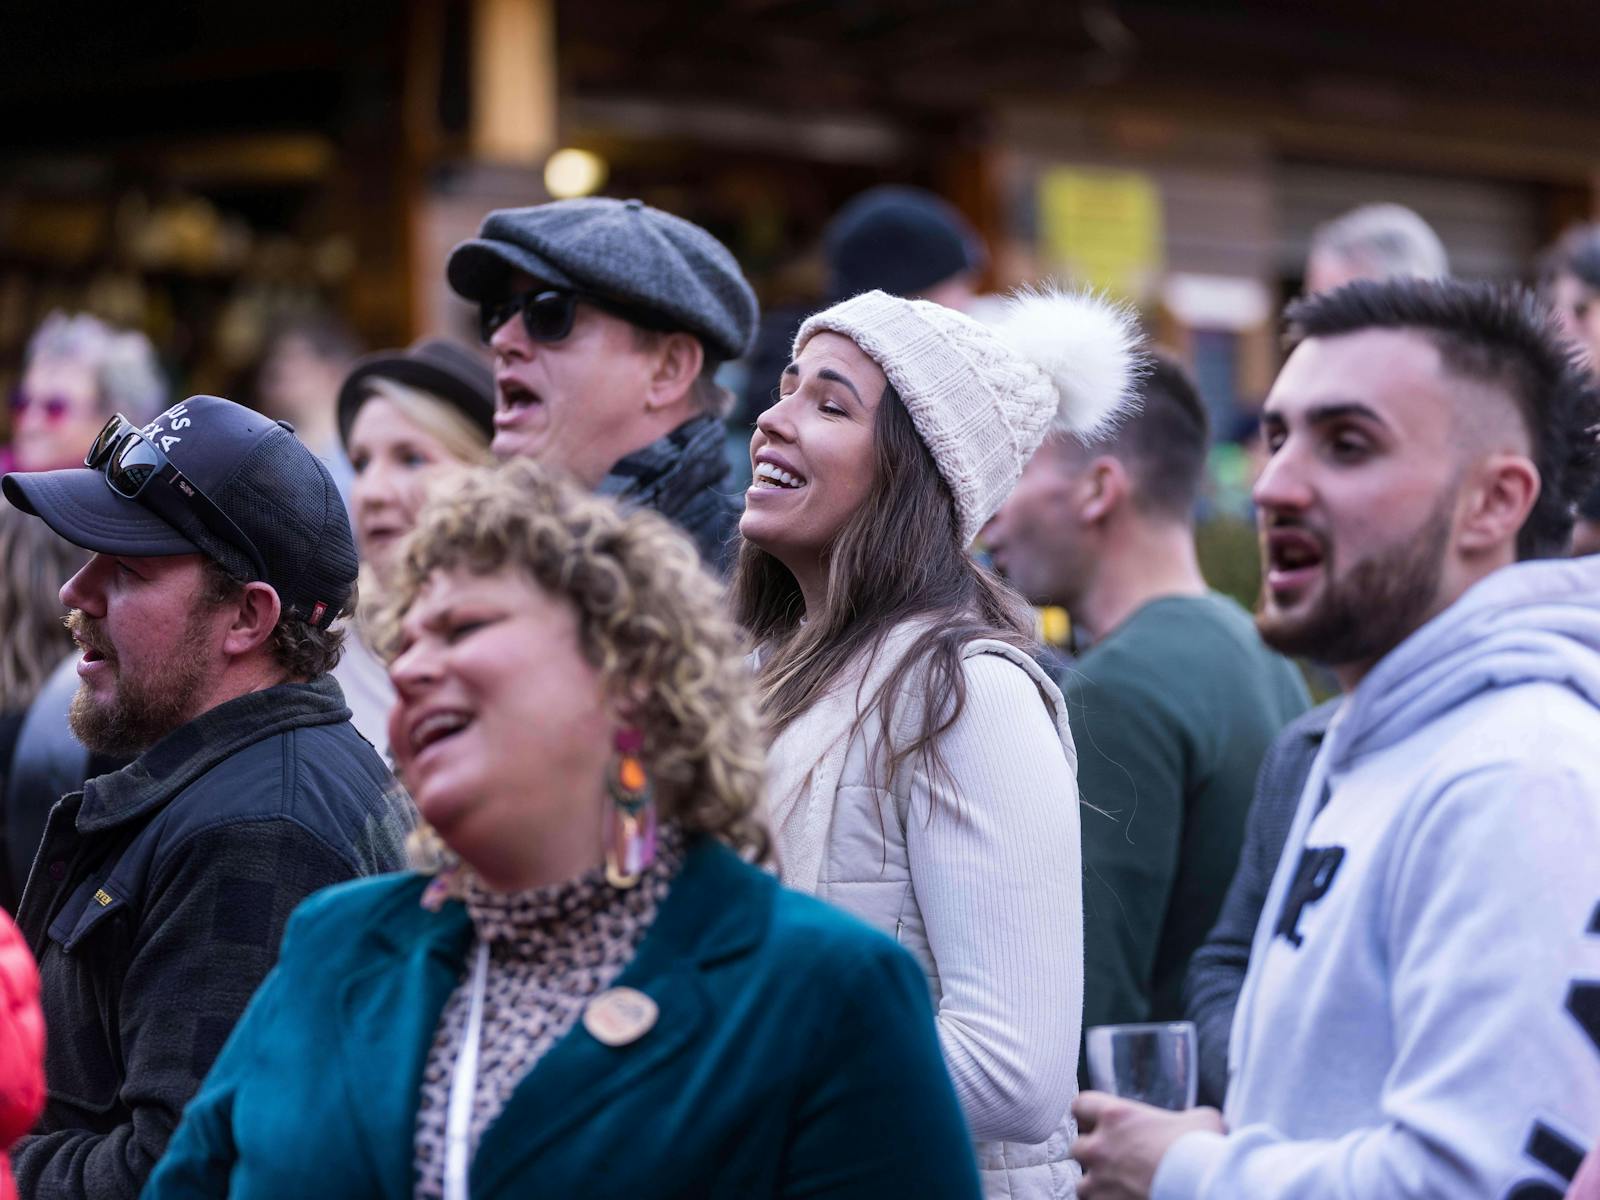 A colour photograph of different people enjoying the chance to sing together at the pub